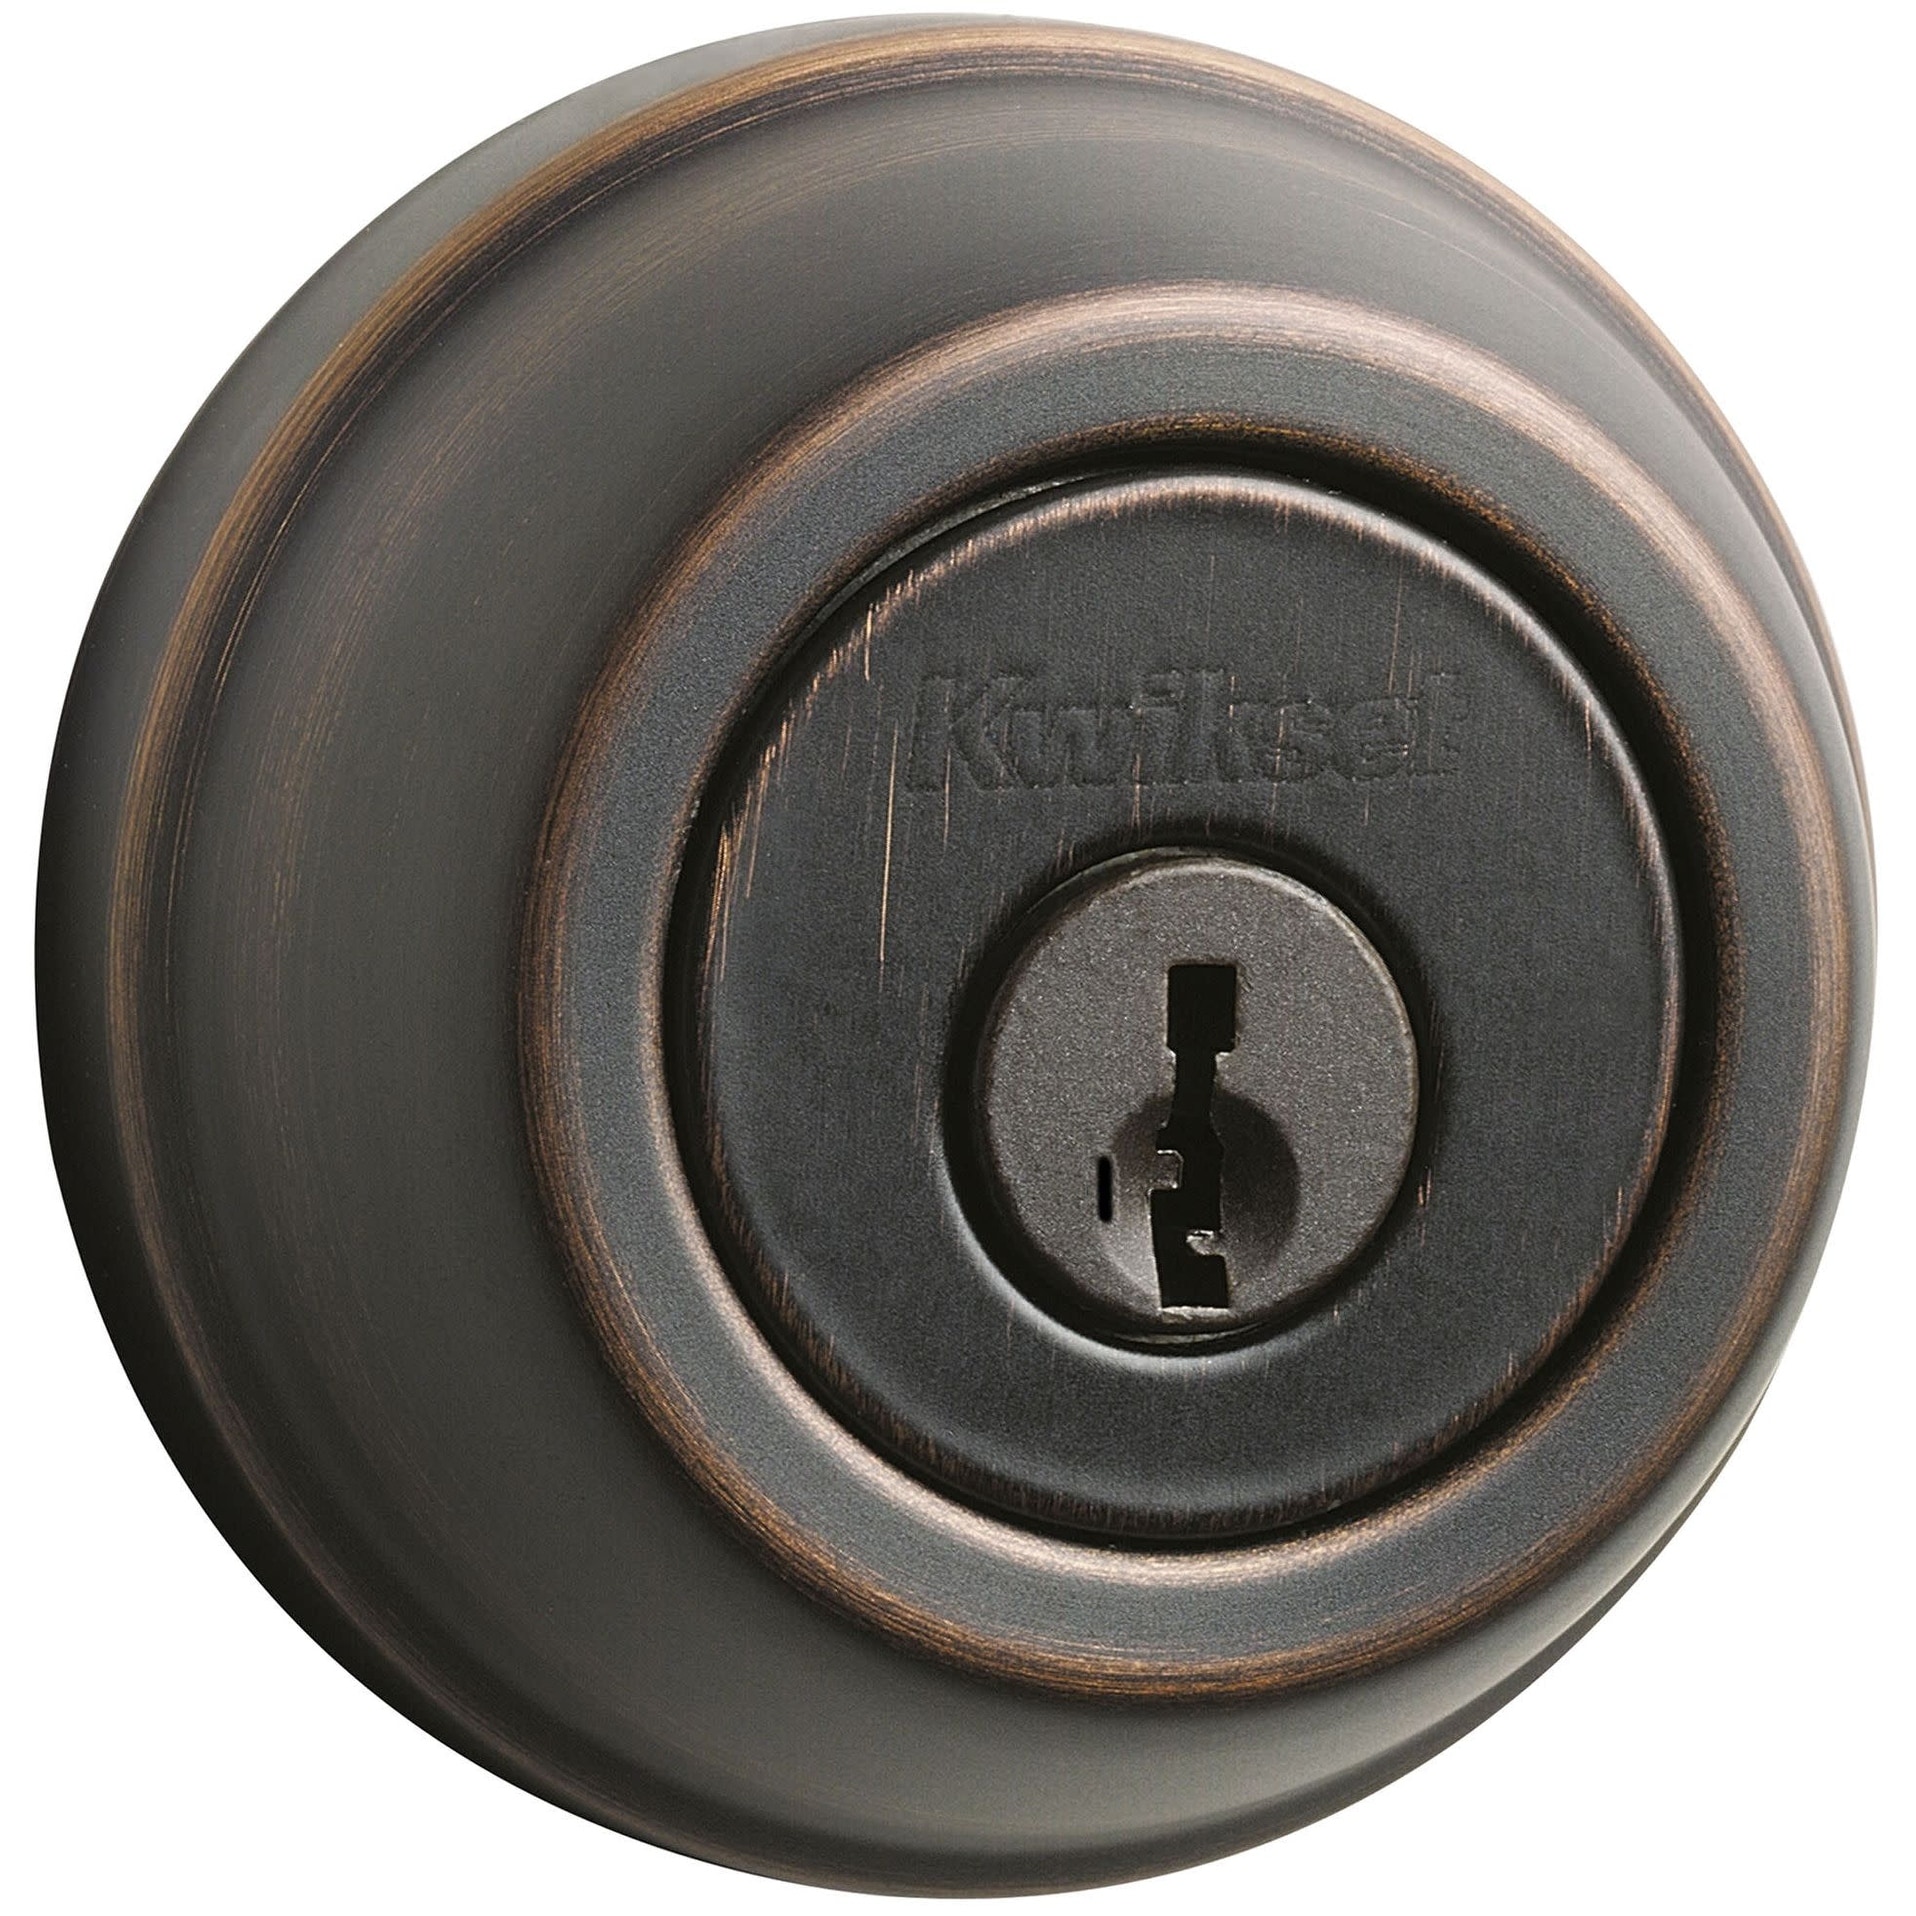 Kwikset Single Cylinder Deadbolt with SmartKey from the 780 Series Bed  Bath  Beyond 16114129